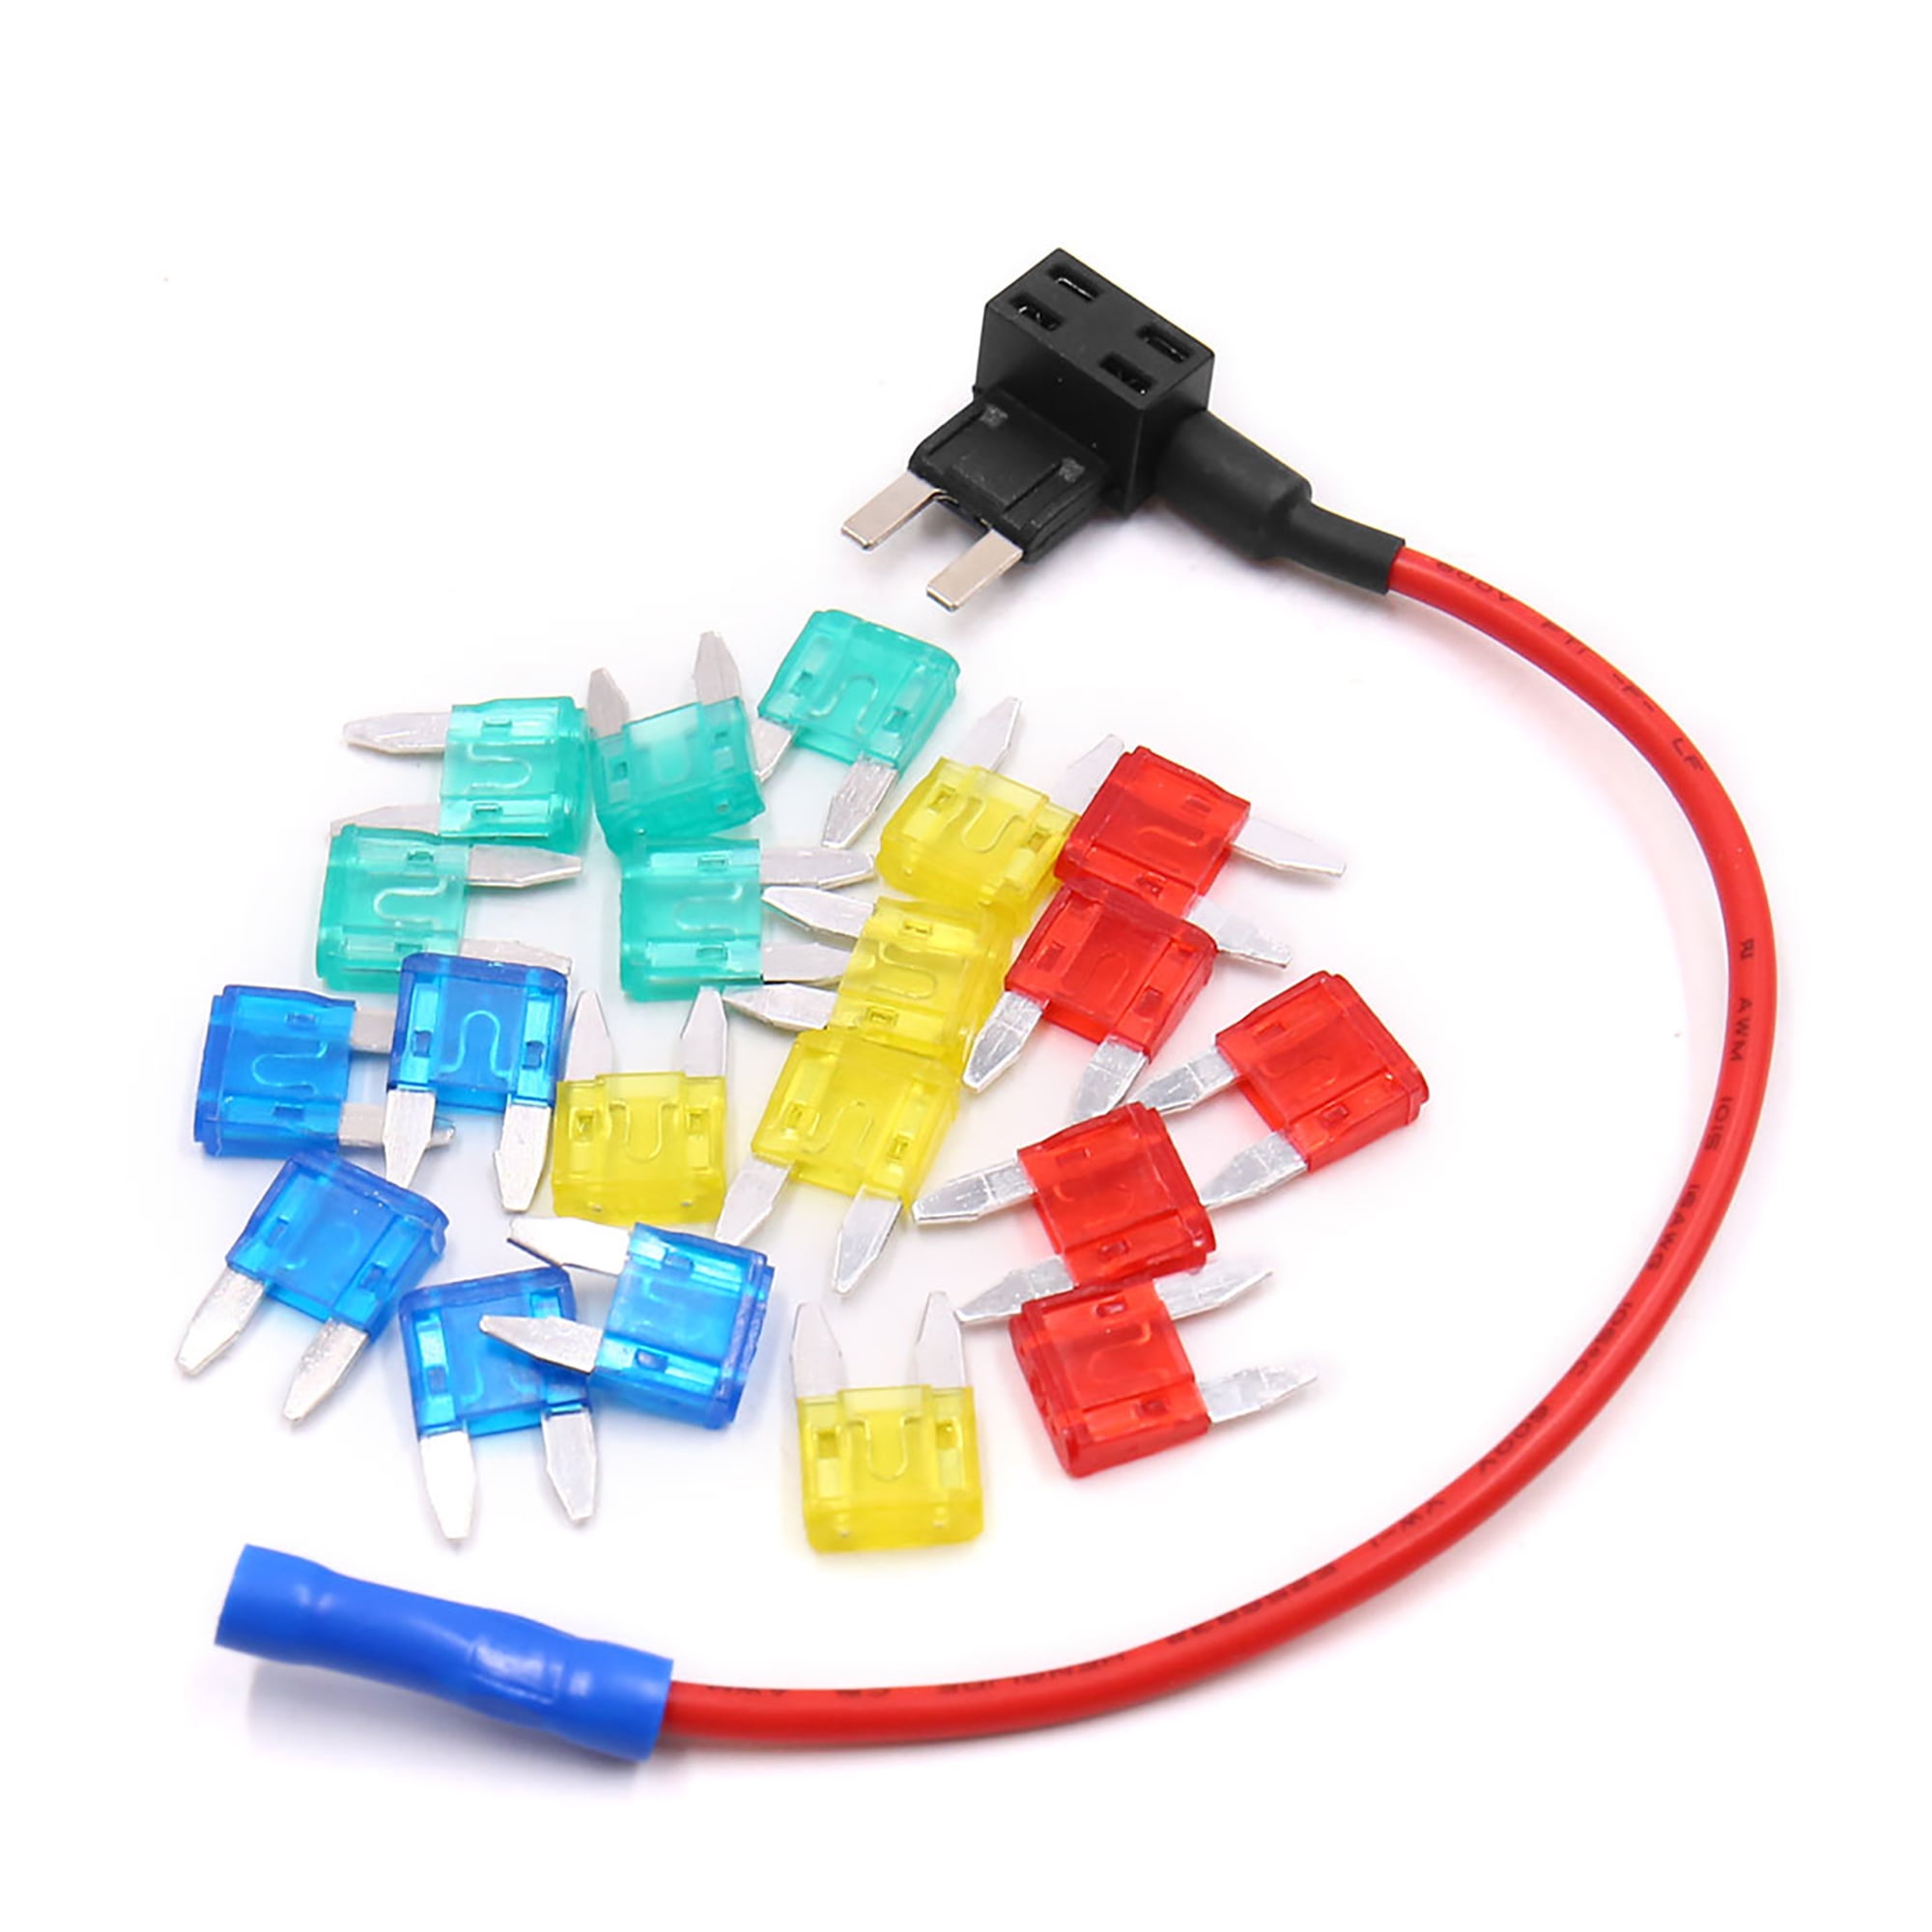 20x Car Auto Quick Connect Installation Fuse Holder Medium Size PP Material Blue 